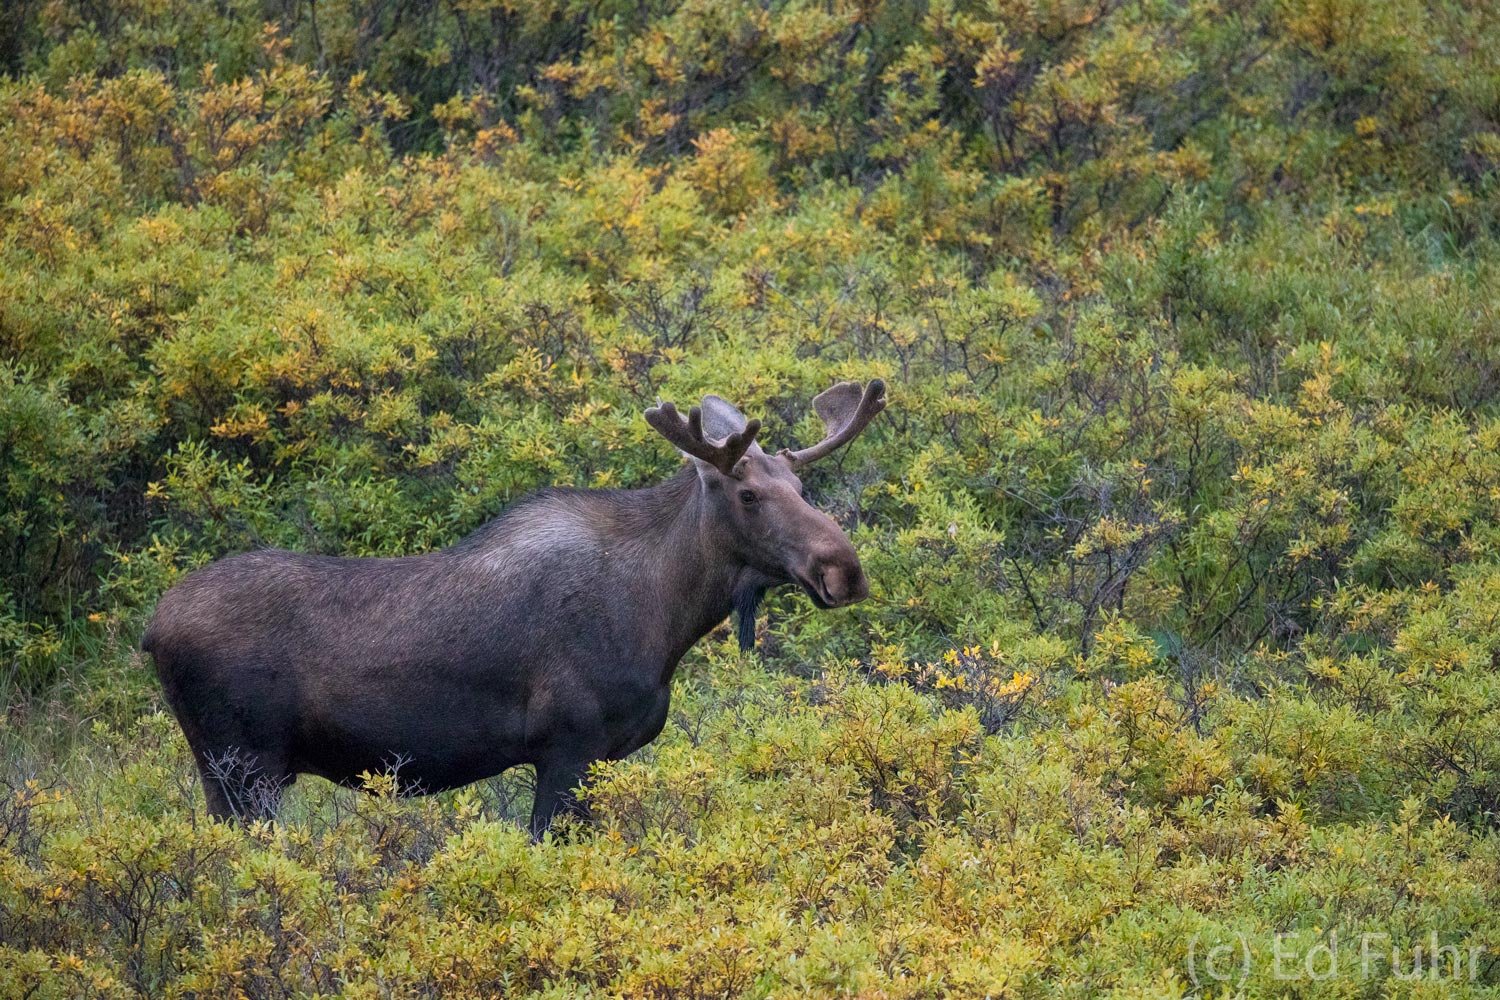 A young male moose grazes among the ubiquitous willows.